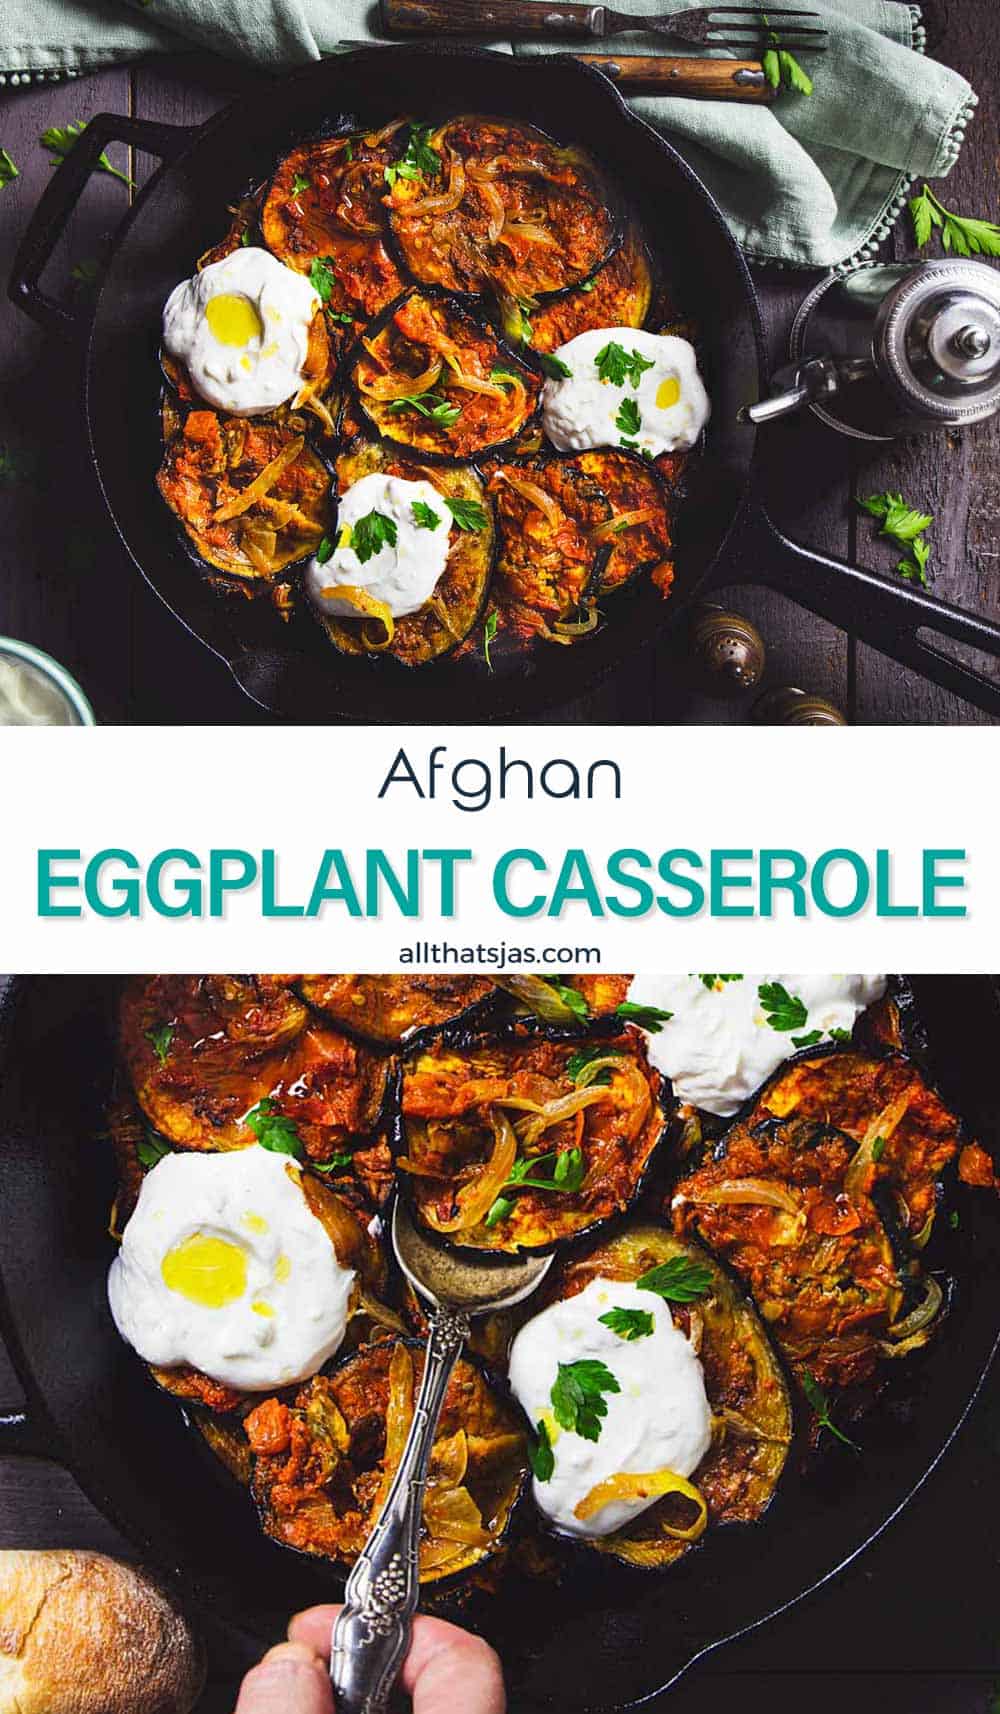 Two-photo image of eggplant dish with text overlay in the middle.